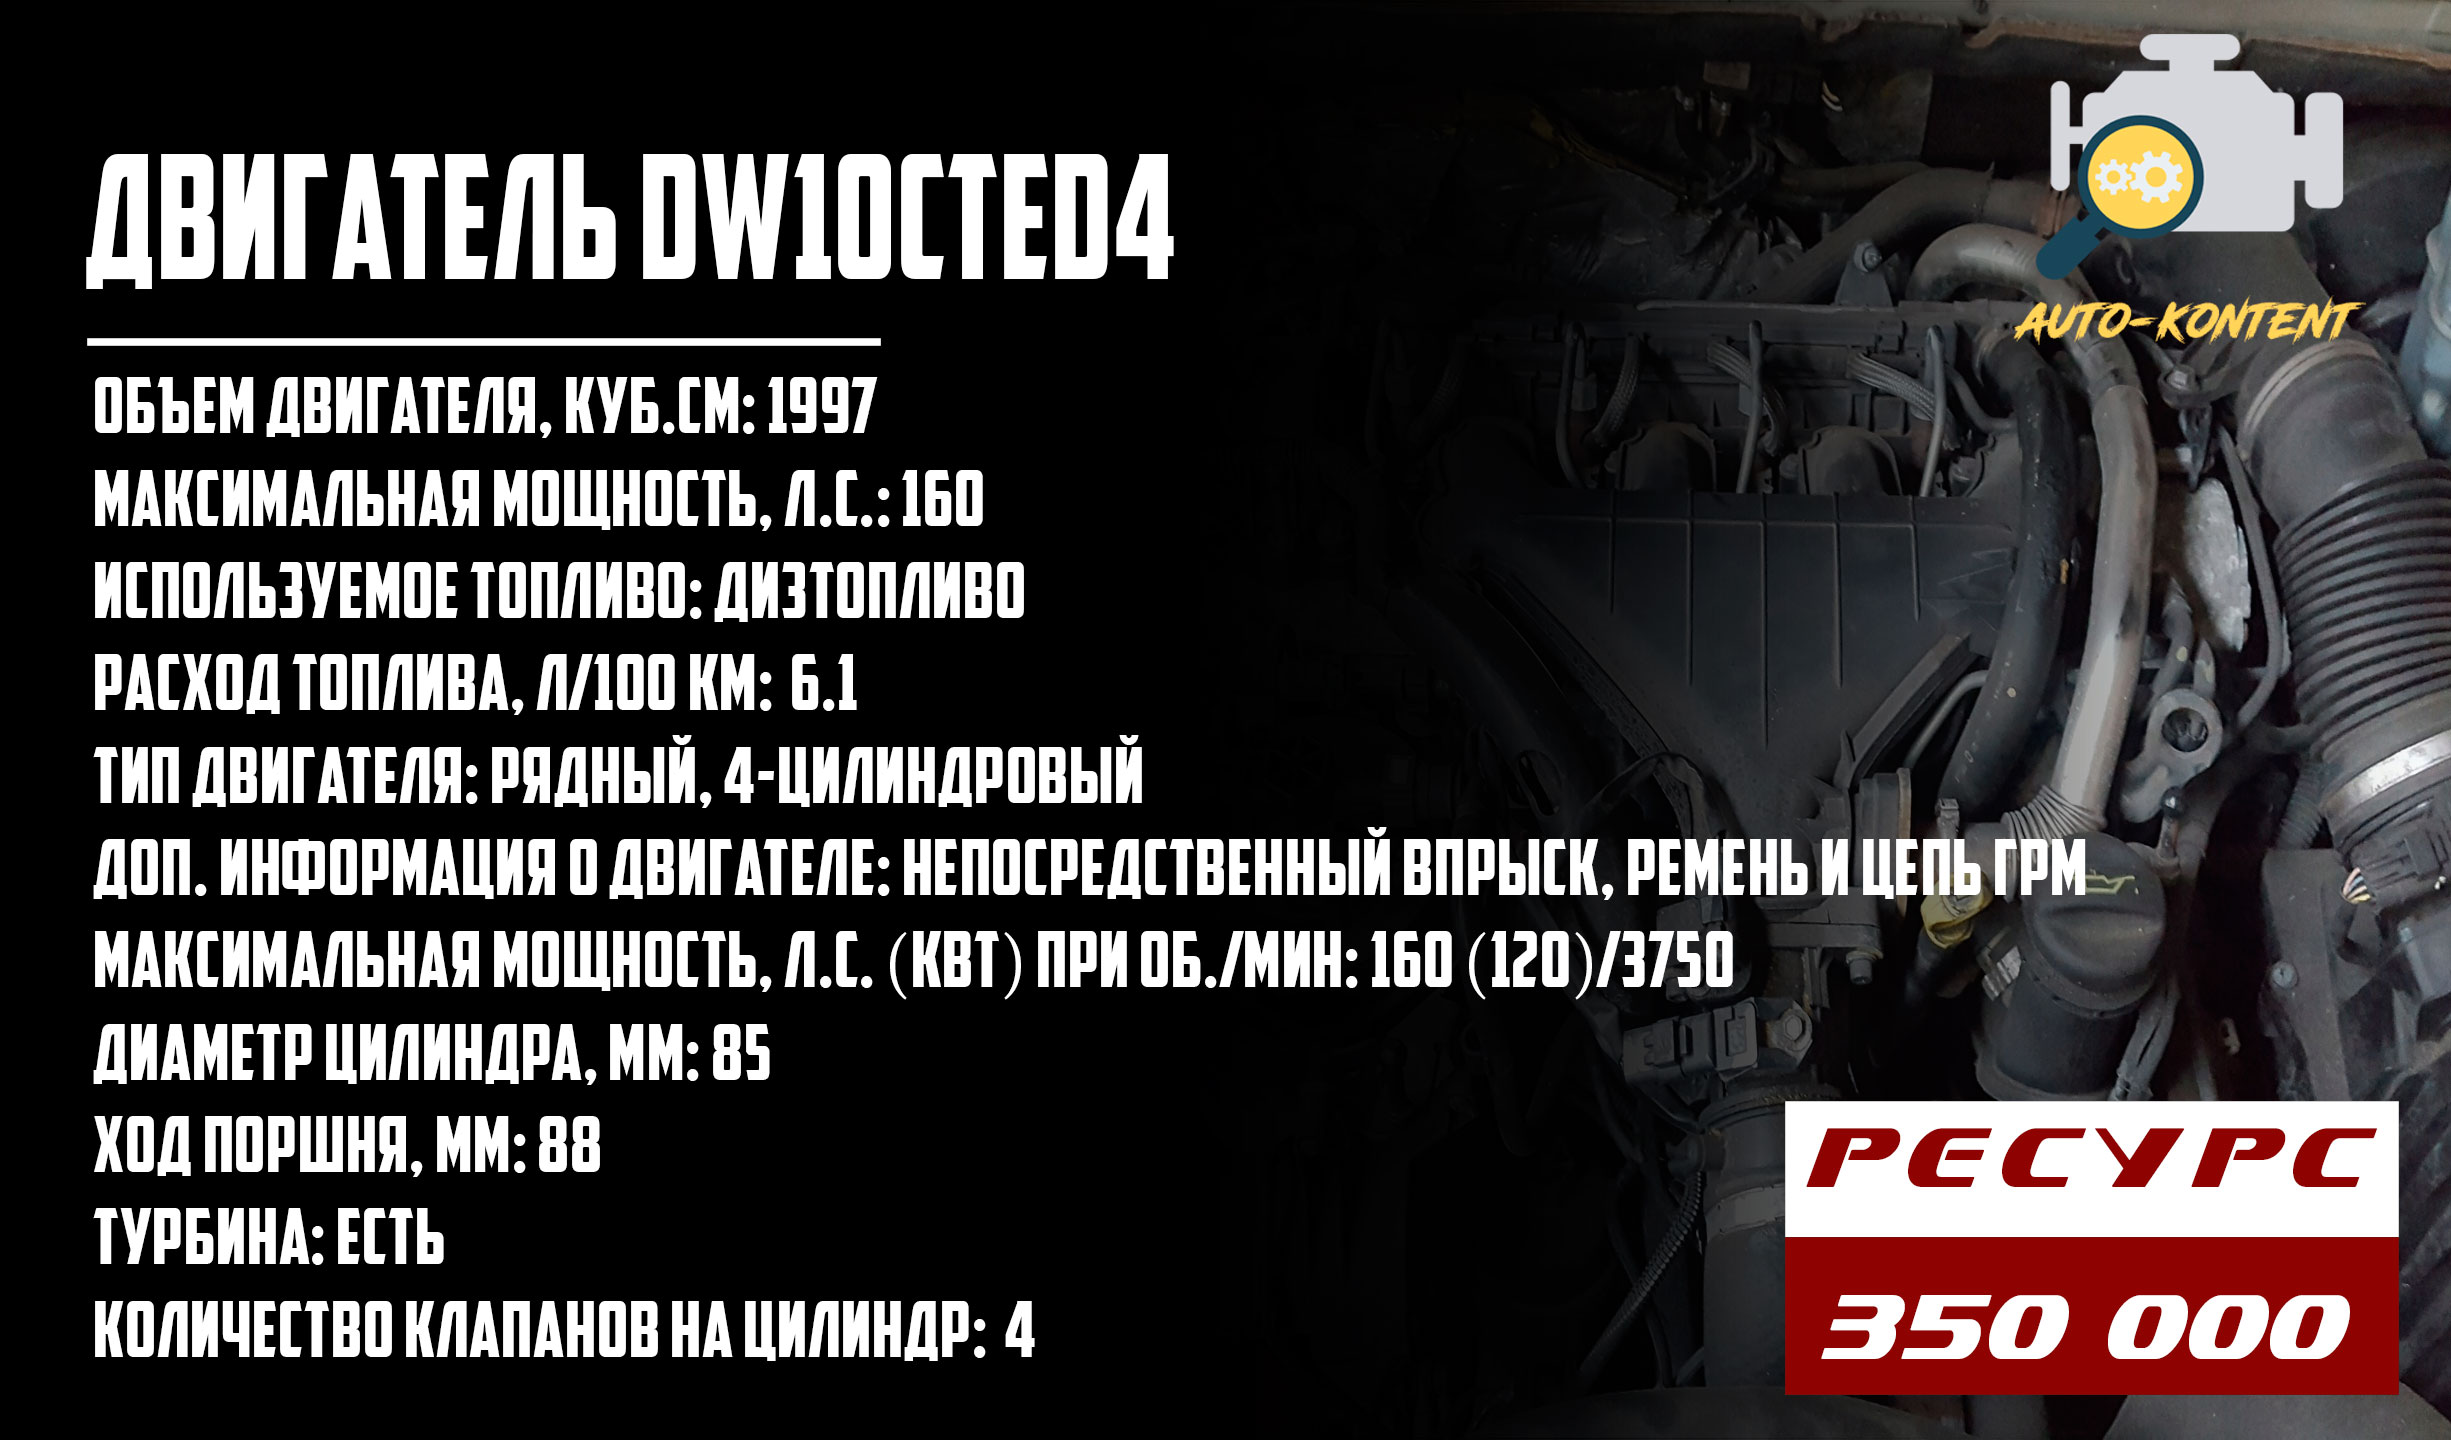 DW10СTED4